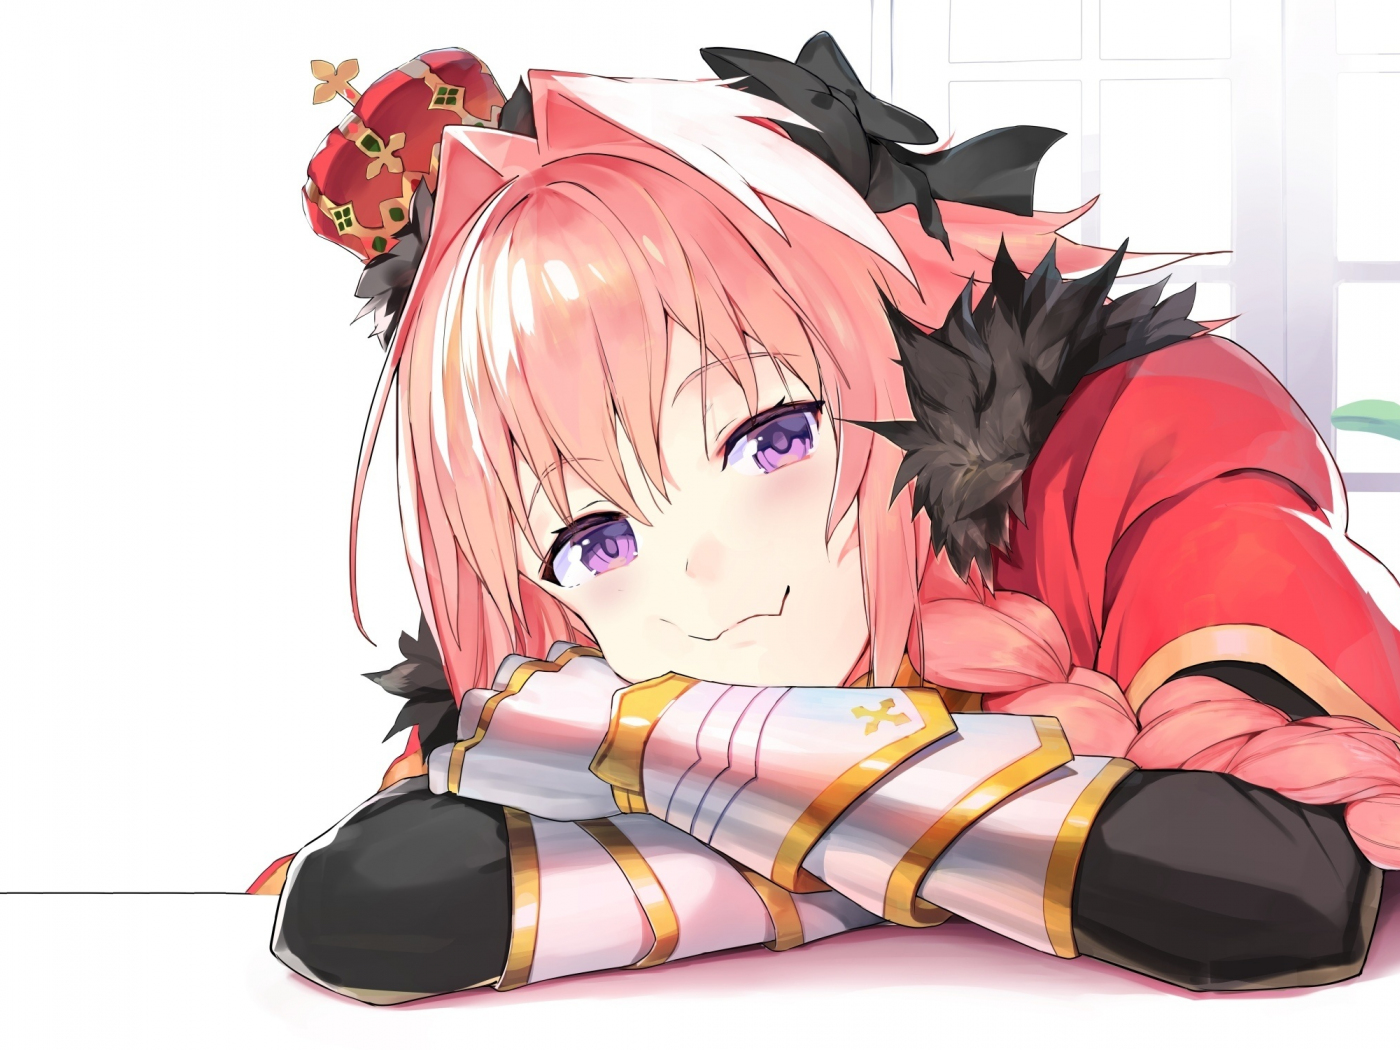 Download 1400x1050 Wallpaper Cute Smile Astolfo Fate Apocrypha Standard 4 3 Fullscreen 1400x1050 Hd Image Background 5606